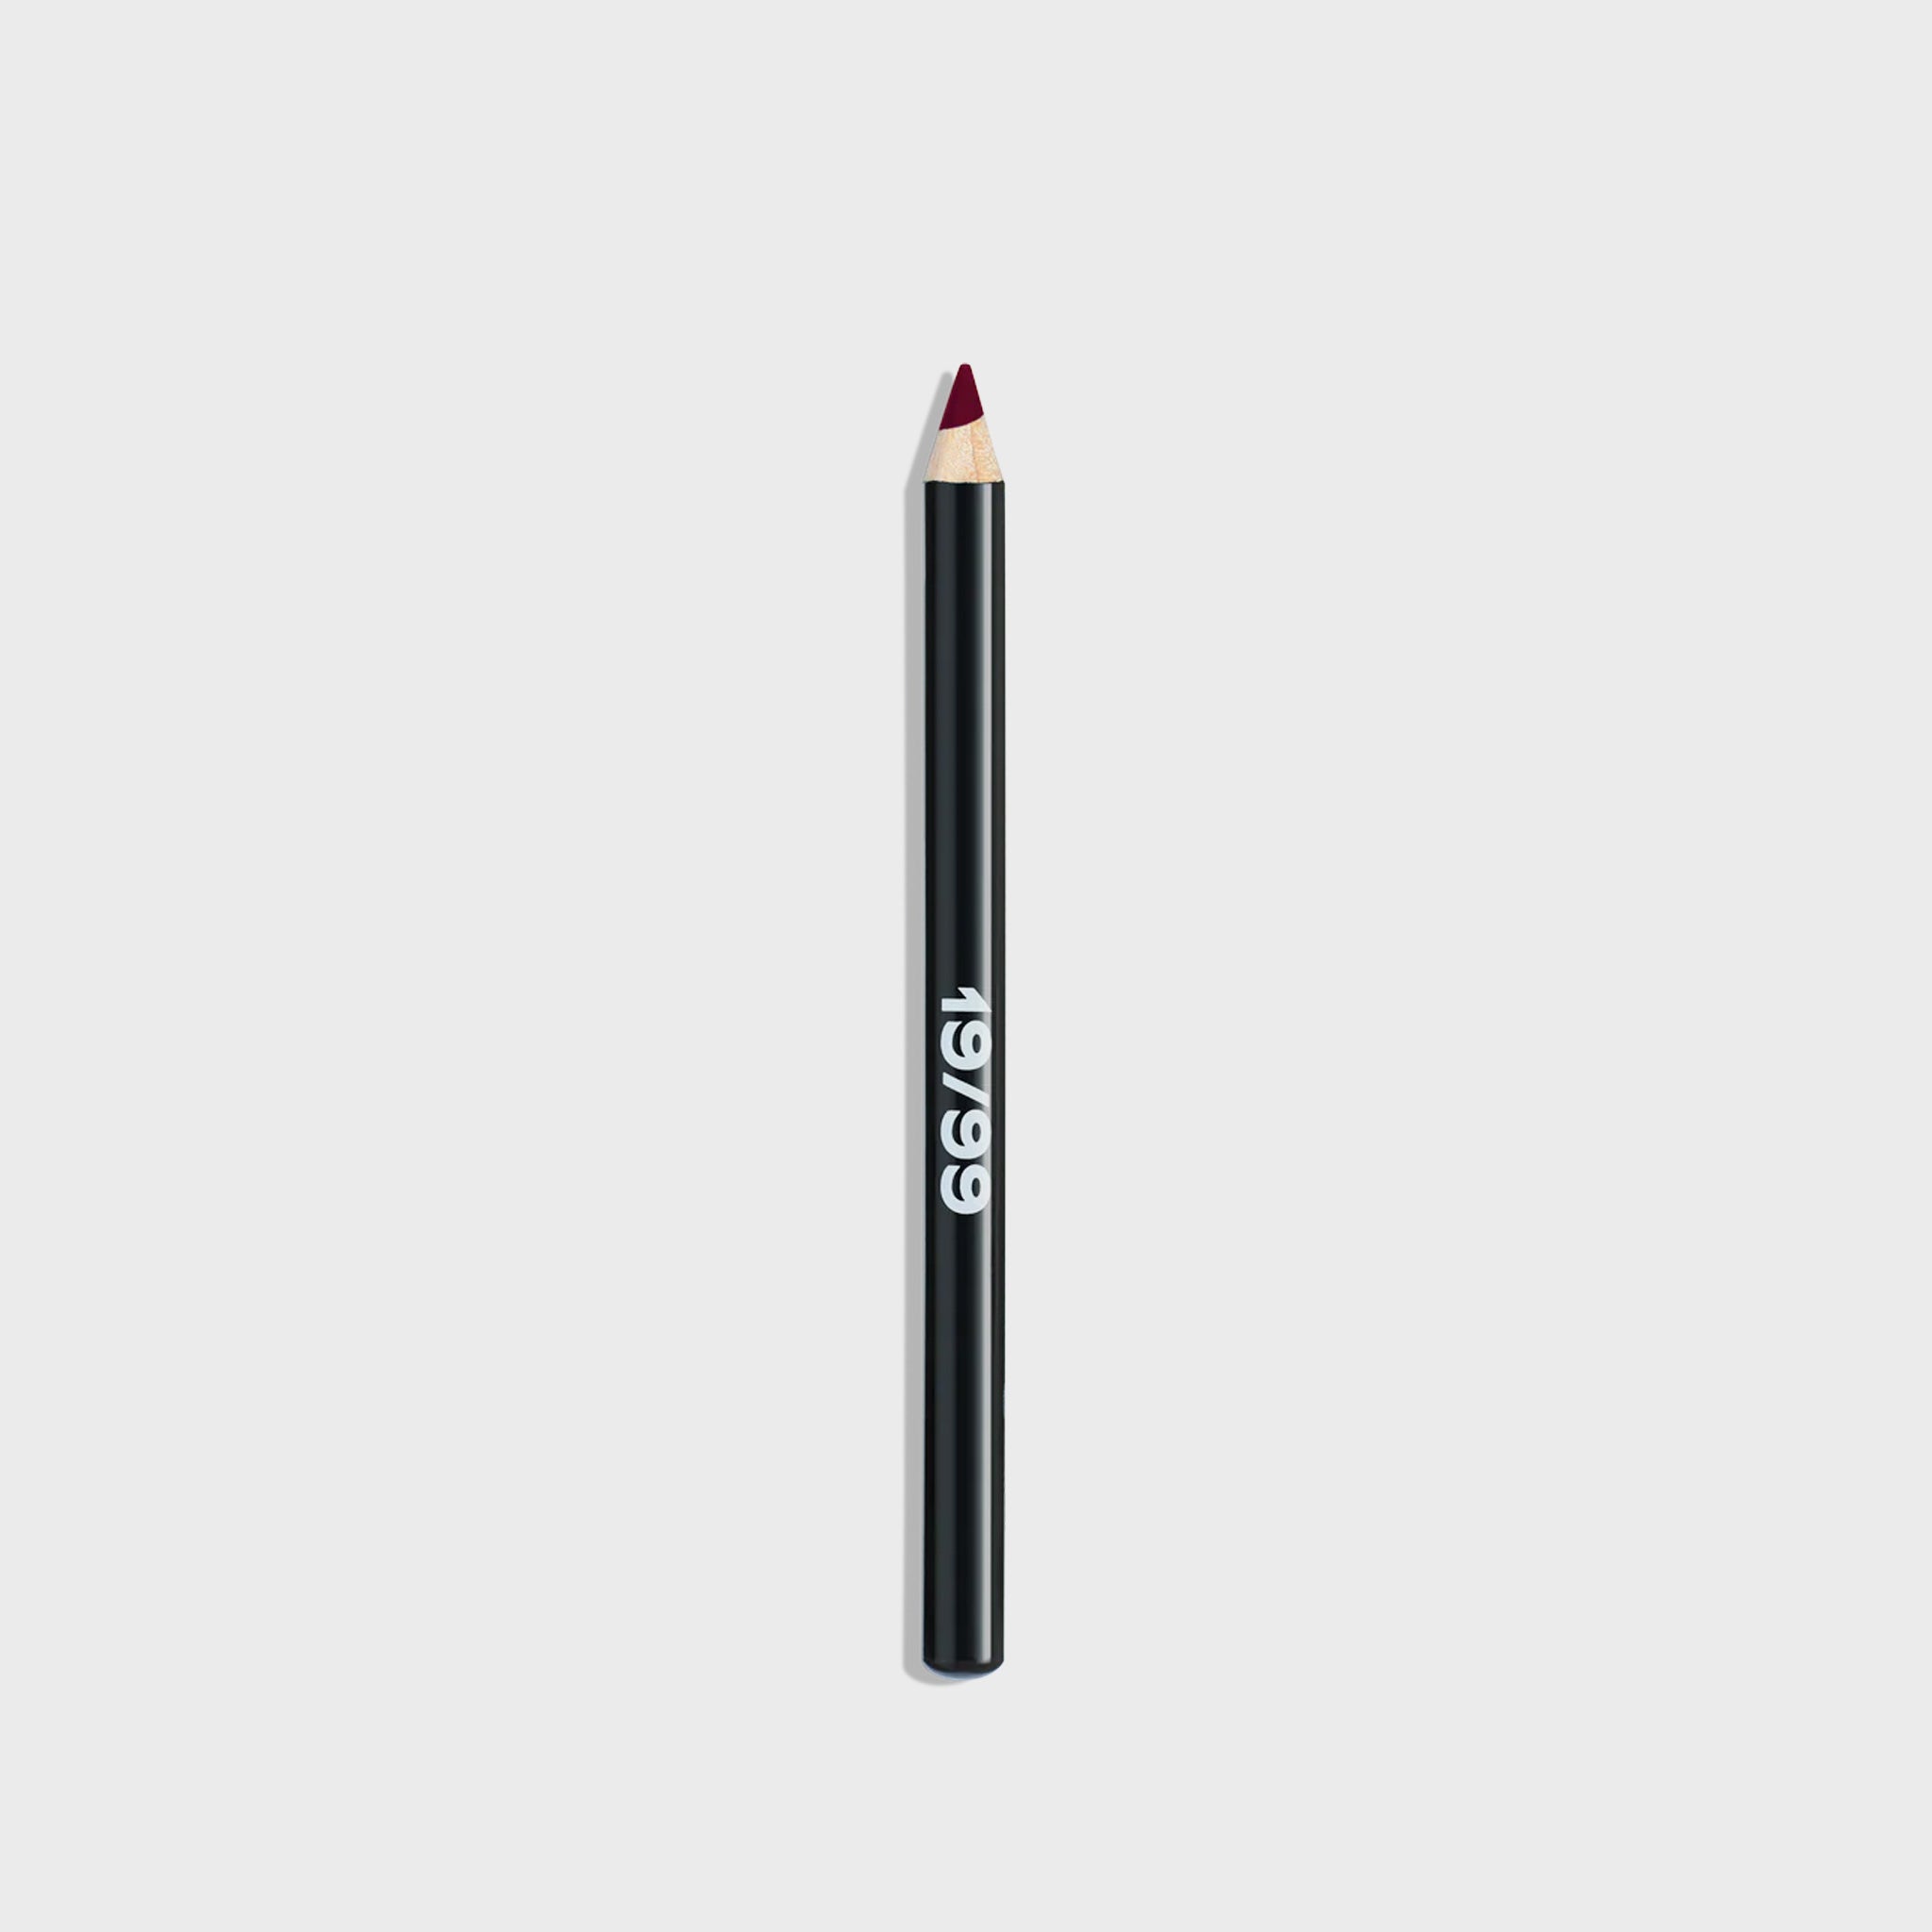 Makeup pencil in deep burgundy red by 19/99, with a black casing and bold 19/99 logo printed on the side of the pencil.